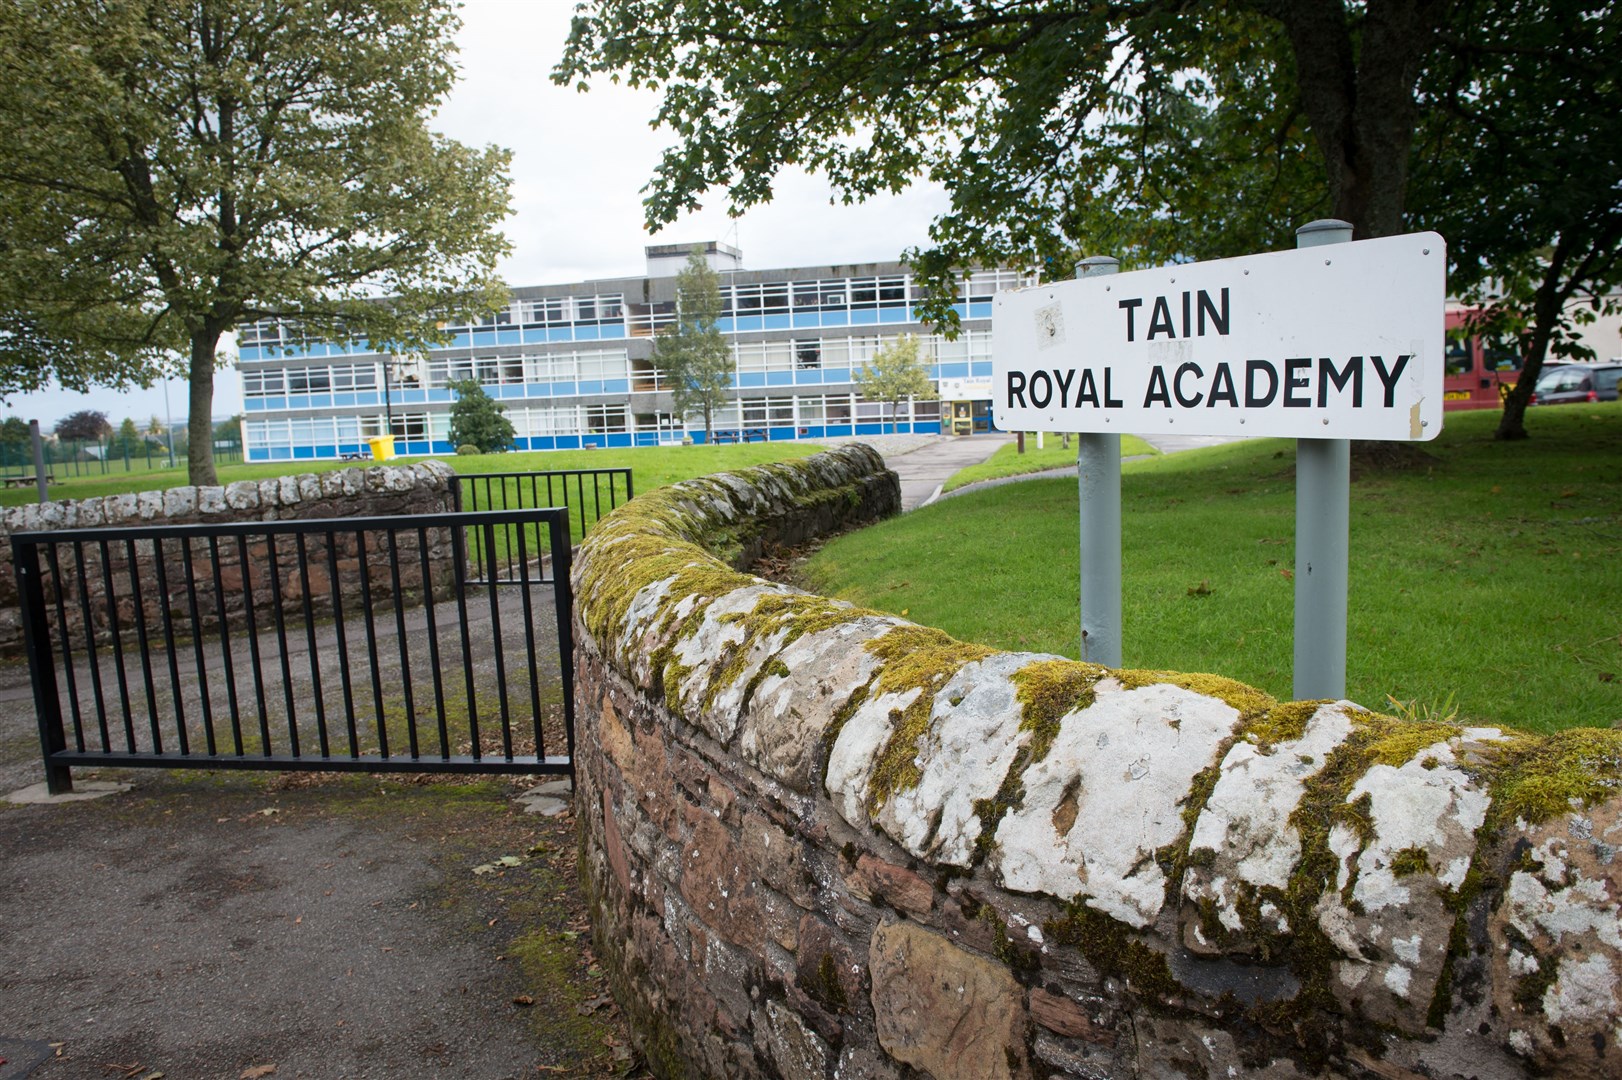 Tain Royal Academy is set to be replaced, along with several other local schools, by a new school campus serving three to 18 years olds.